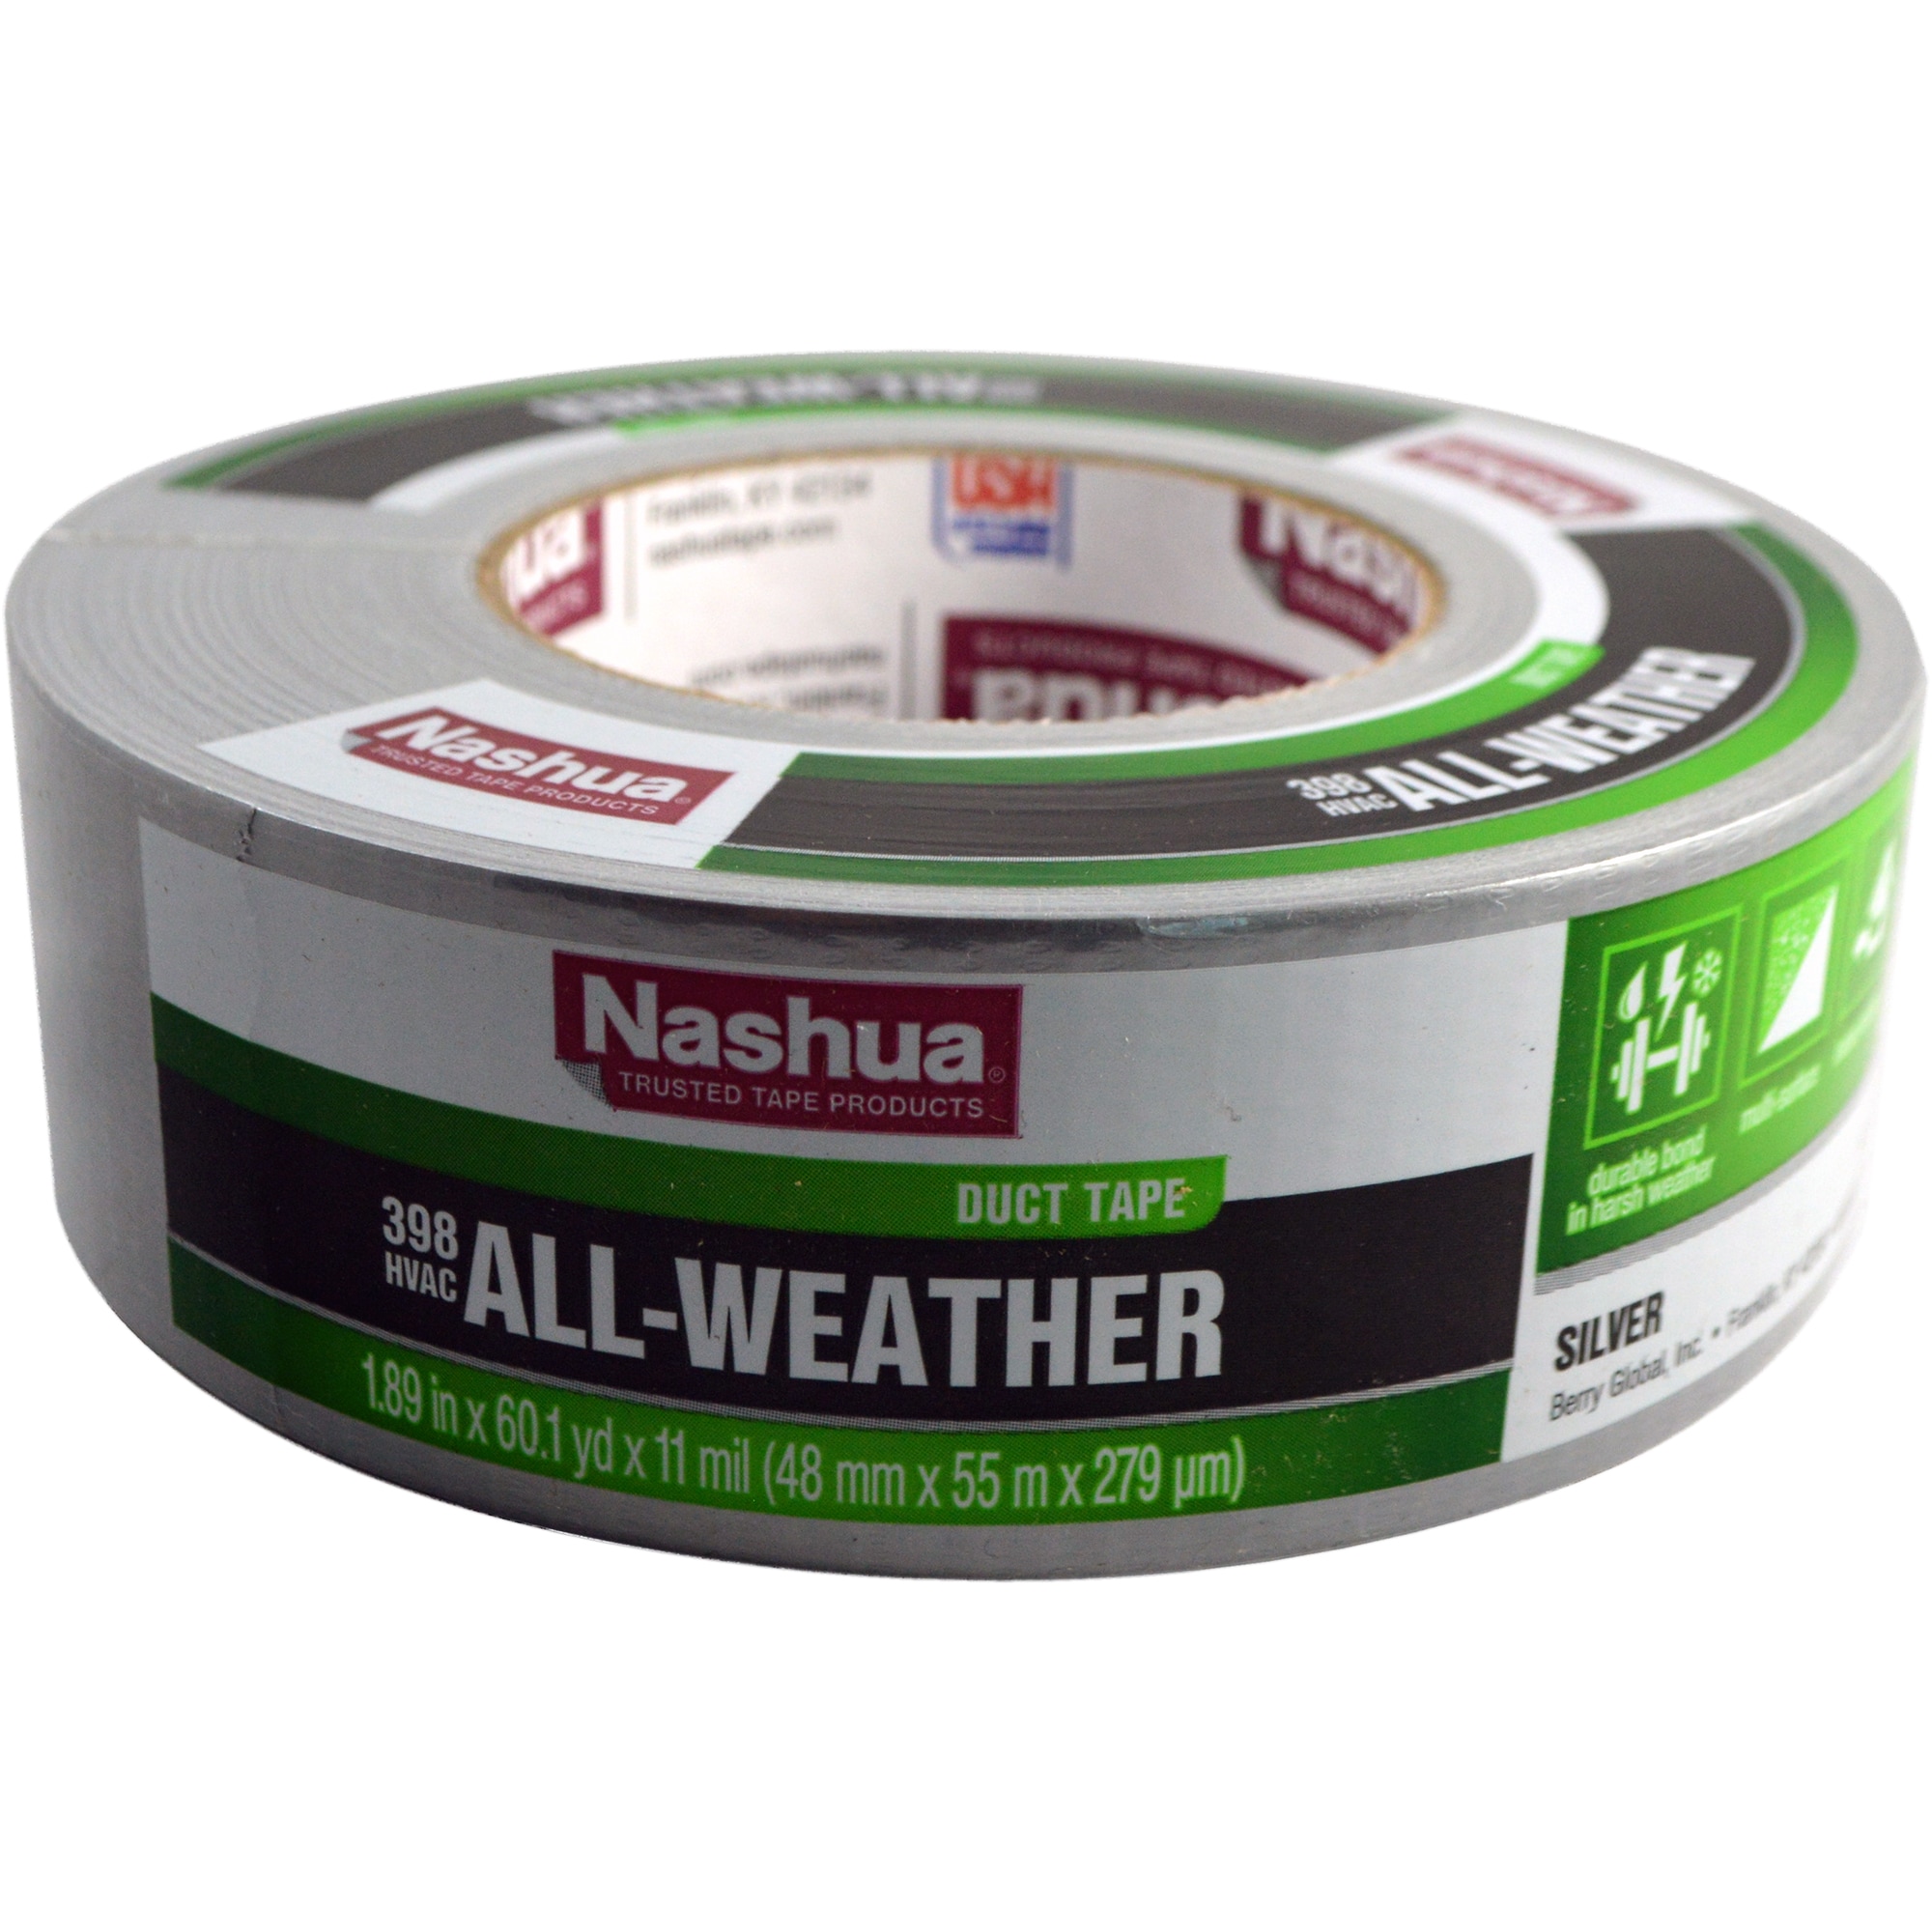 48mm x 55M Nashua 398 Professional Duct Tape SILVER 12 Roll Convenience Case 